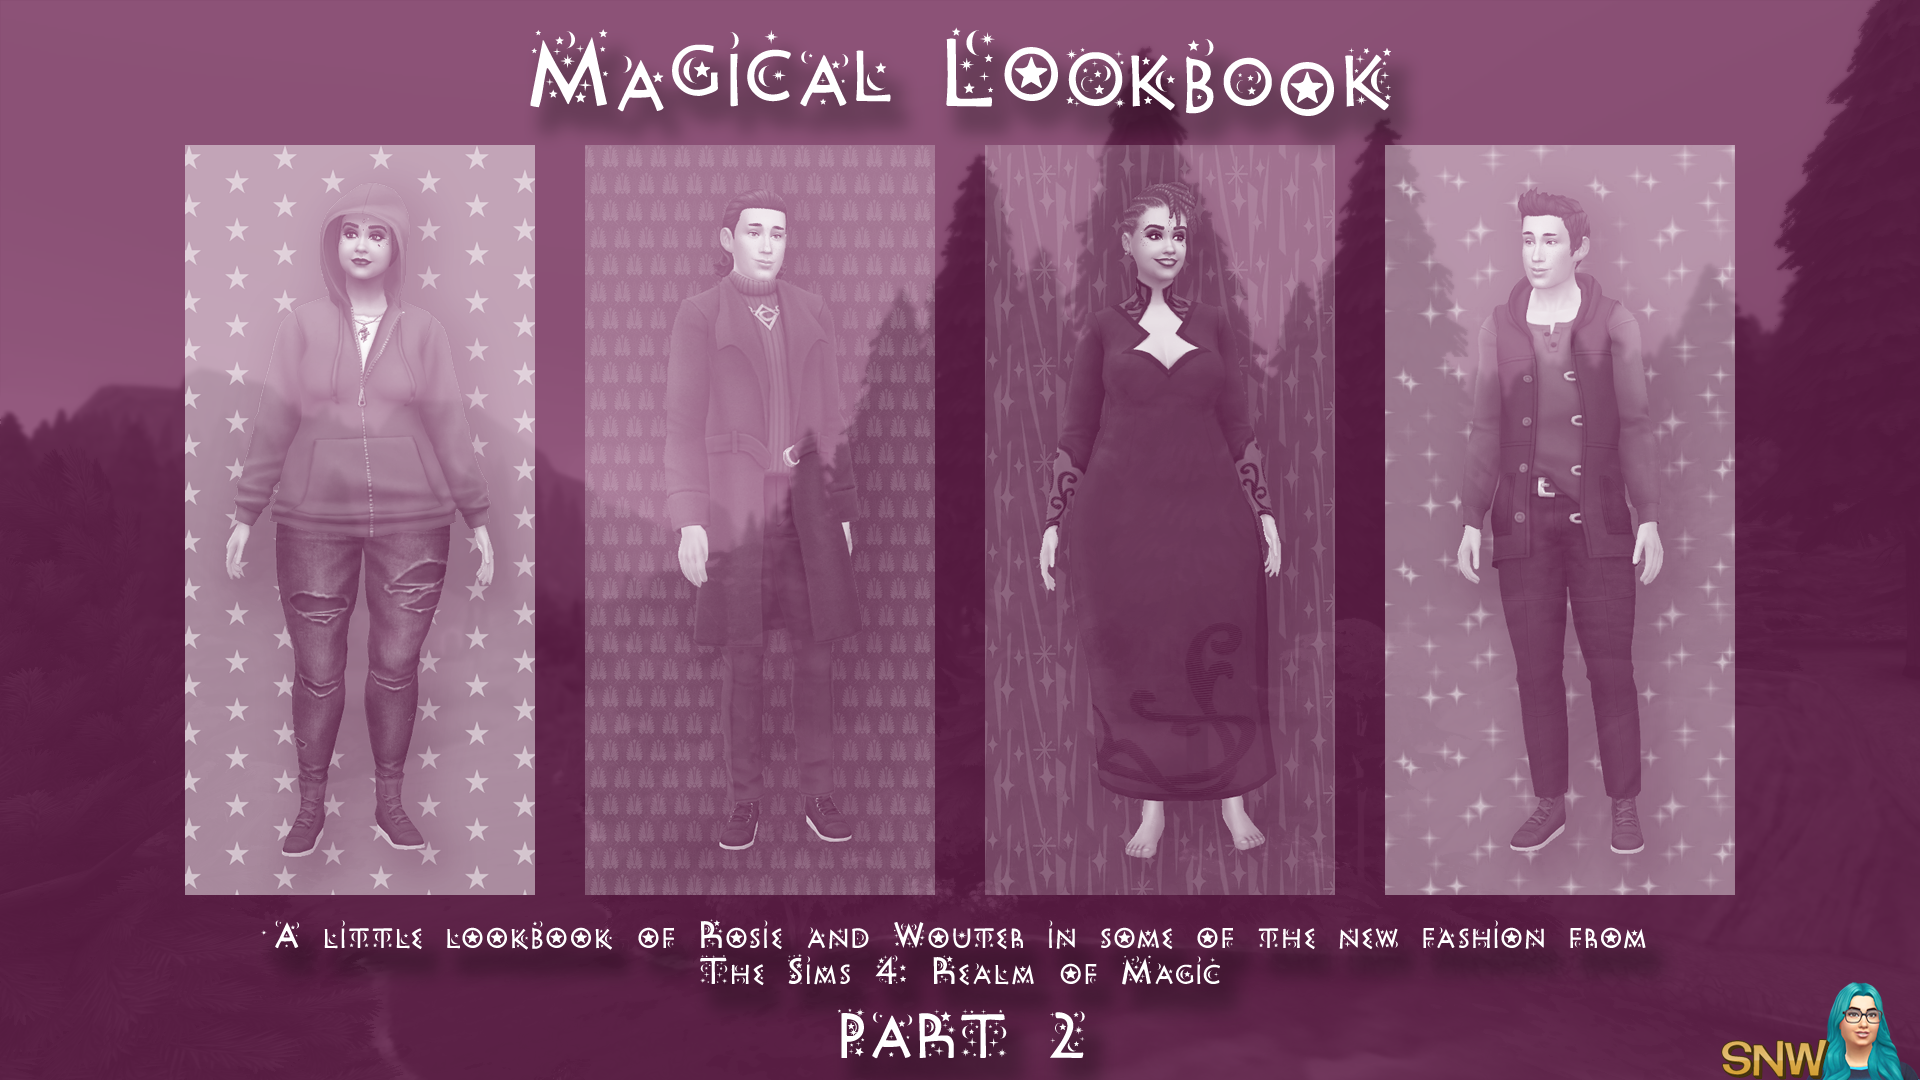 The Sims 4: Realm of Magic - A Little Lookbook by Rosie and Cheetah - Part 2